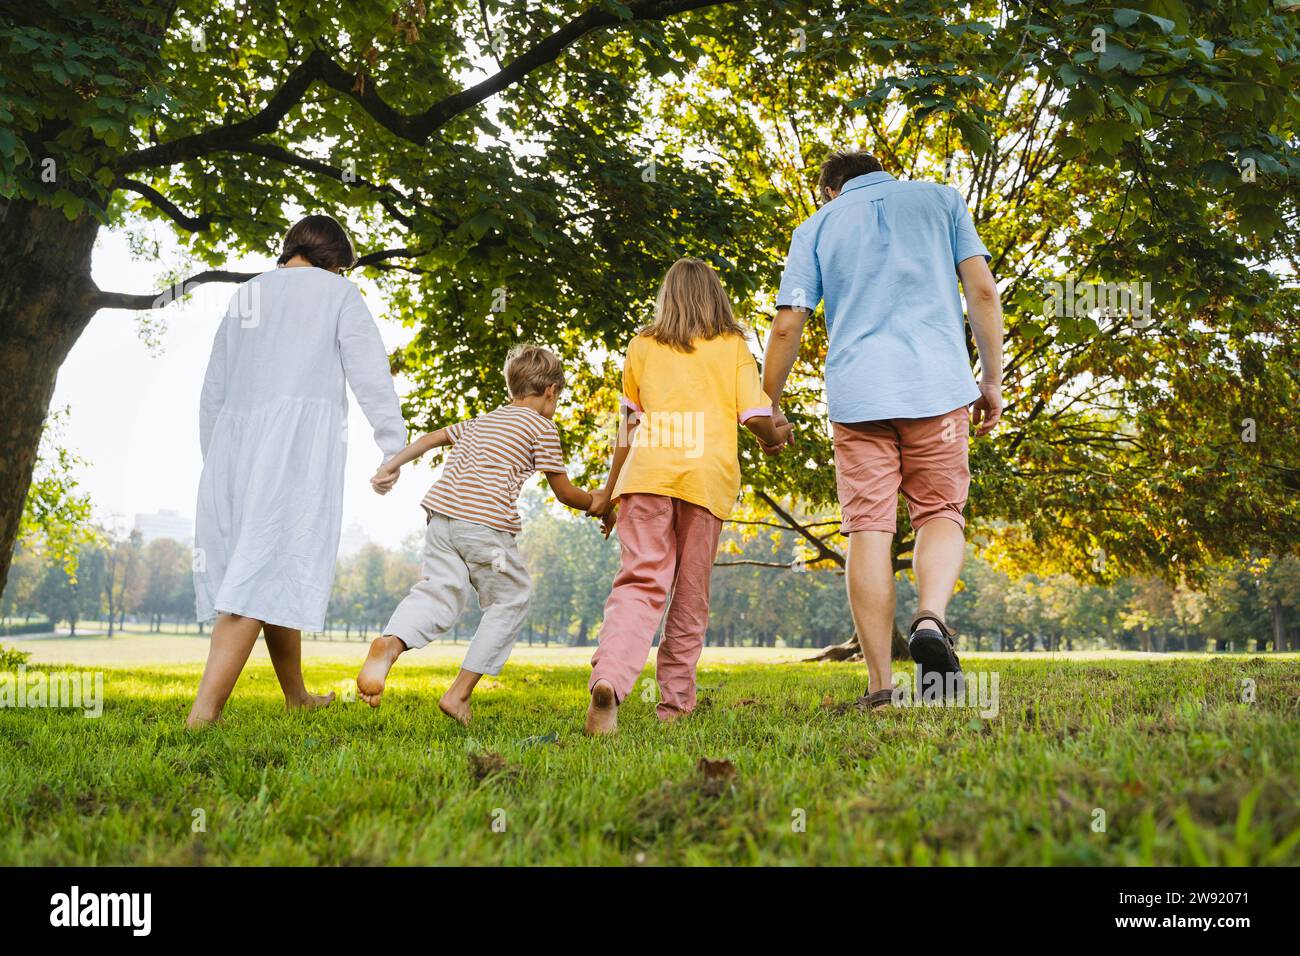 Family holding hands and walking on grass at park Stock Photo